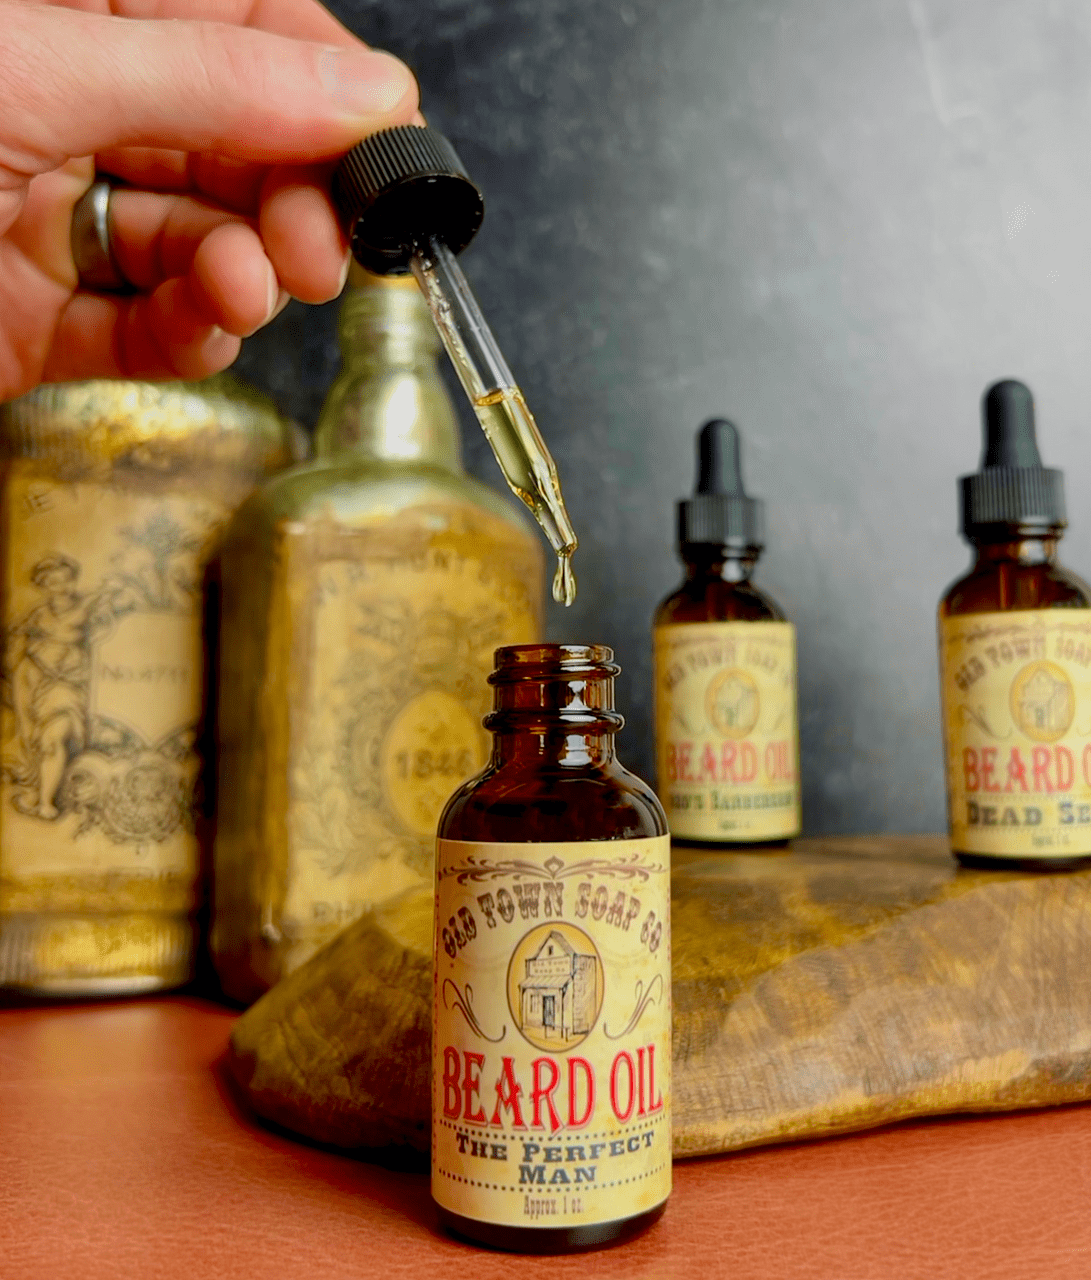 Whiskey -Beard Oil - Old Town Soap Co.